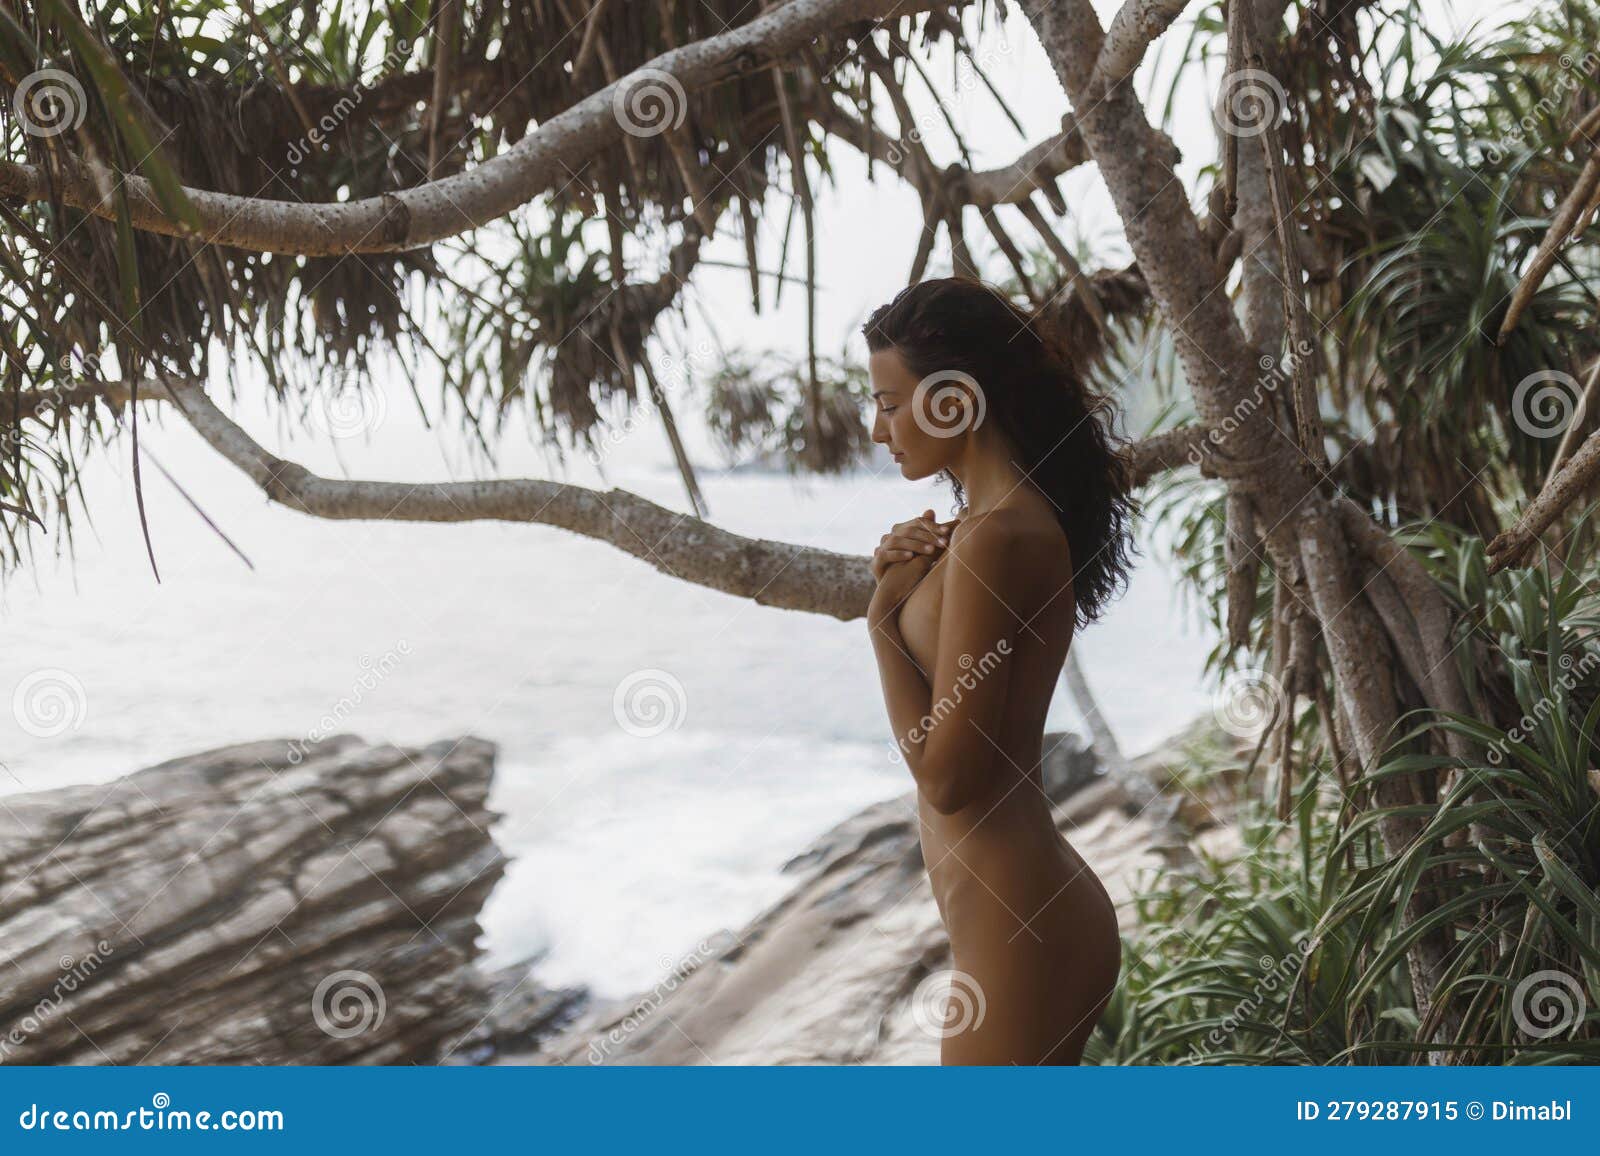 cheryl chatman recommends pictures of nudist women pic